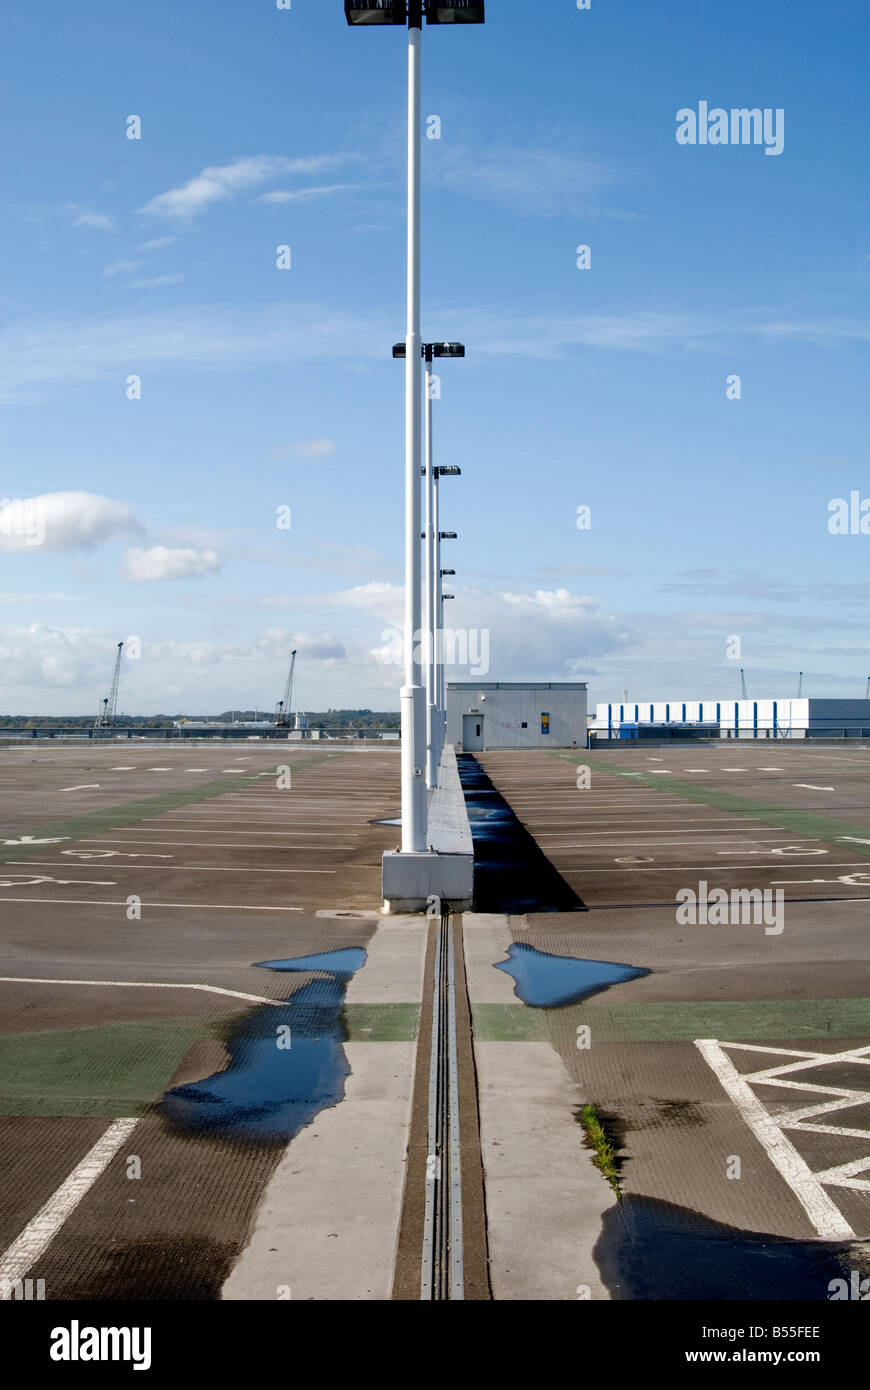 A line of lamp posts on the top level of a empty car park in Southampton with puddles, blue sky and clouds Stock Photo